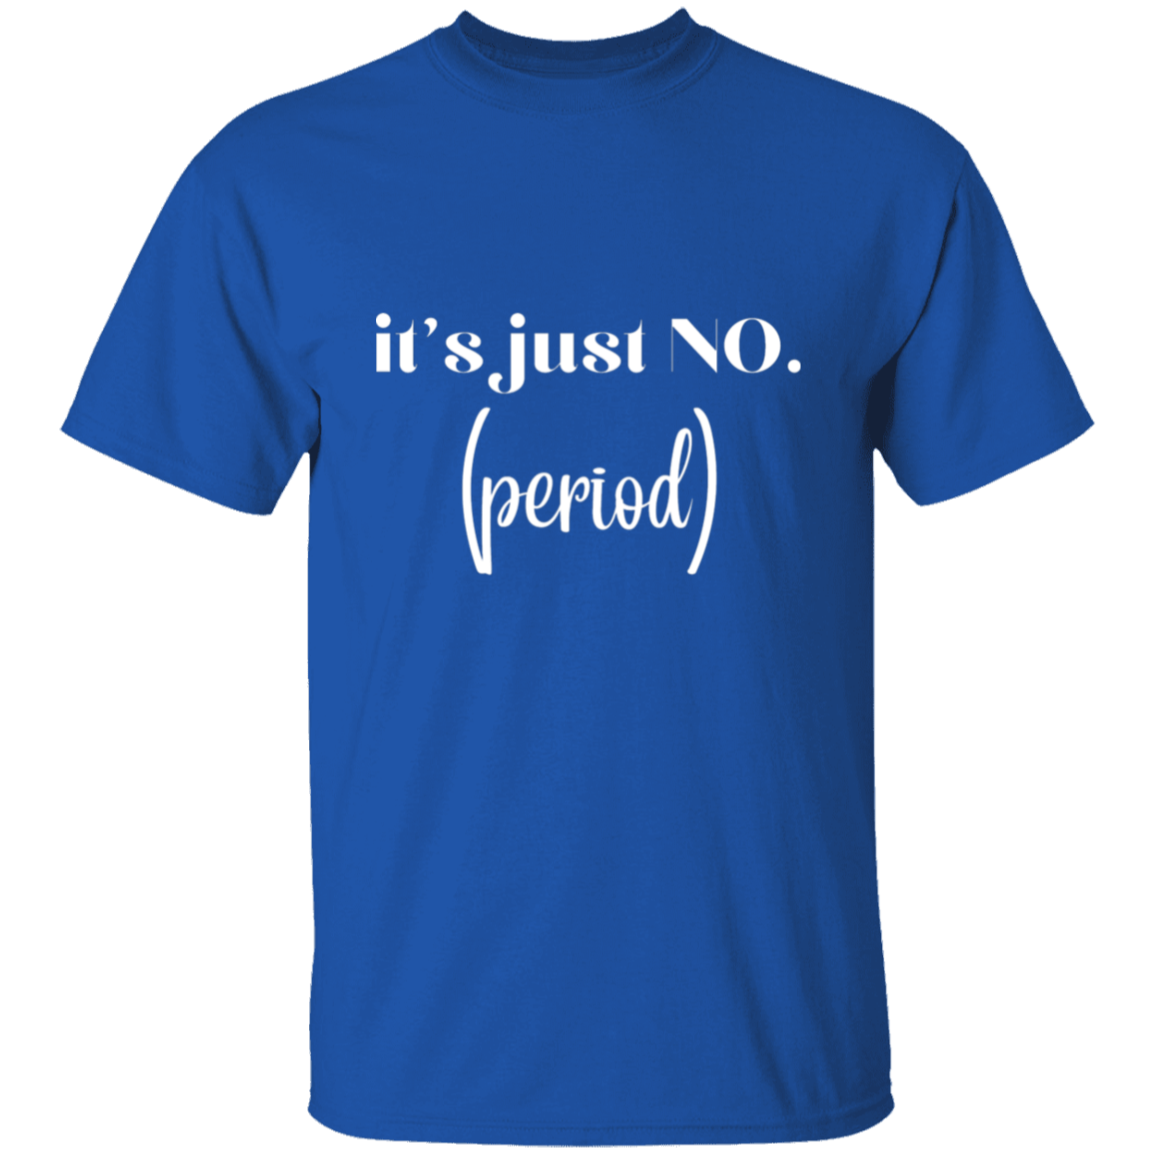 it's just no.(period). T-Shirt